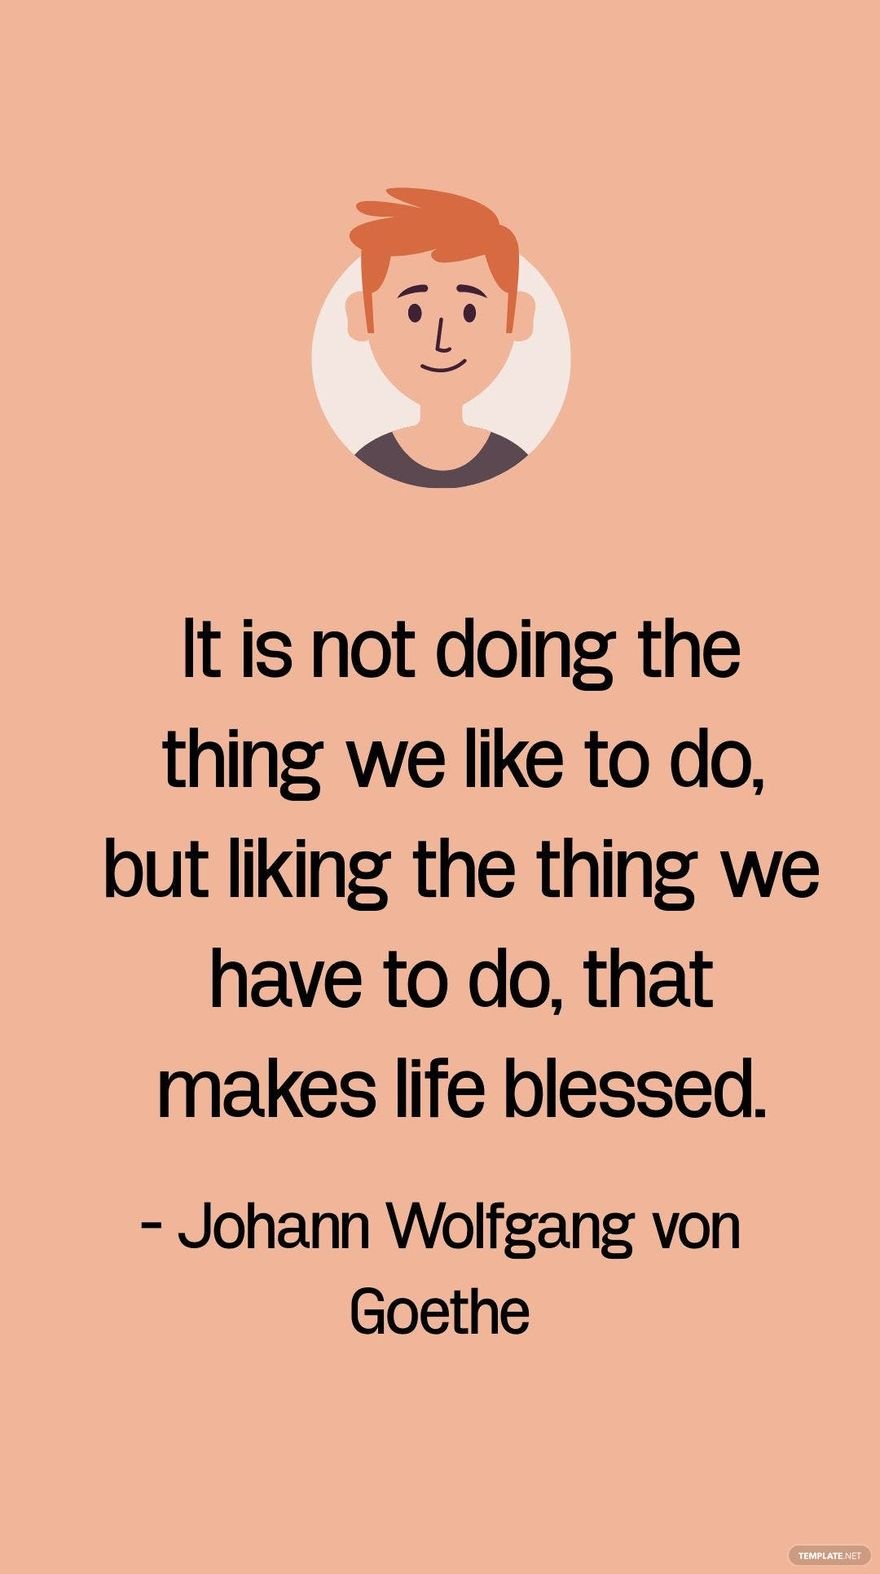 Johann Wolfgang von Goethe - It is not doing the thing we like to do, but liking the thing we have to do, that makes life blessed.